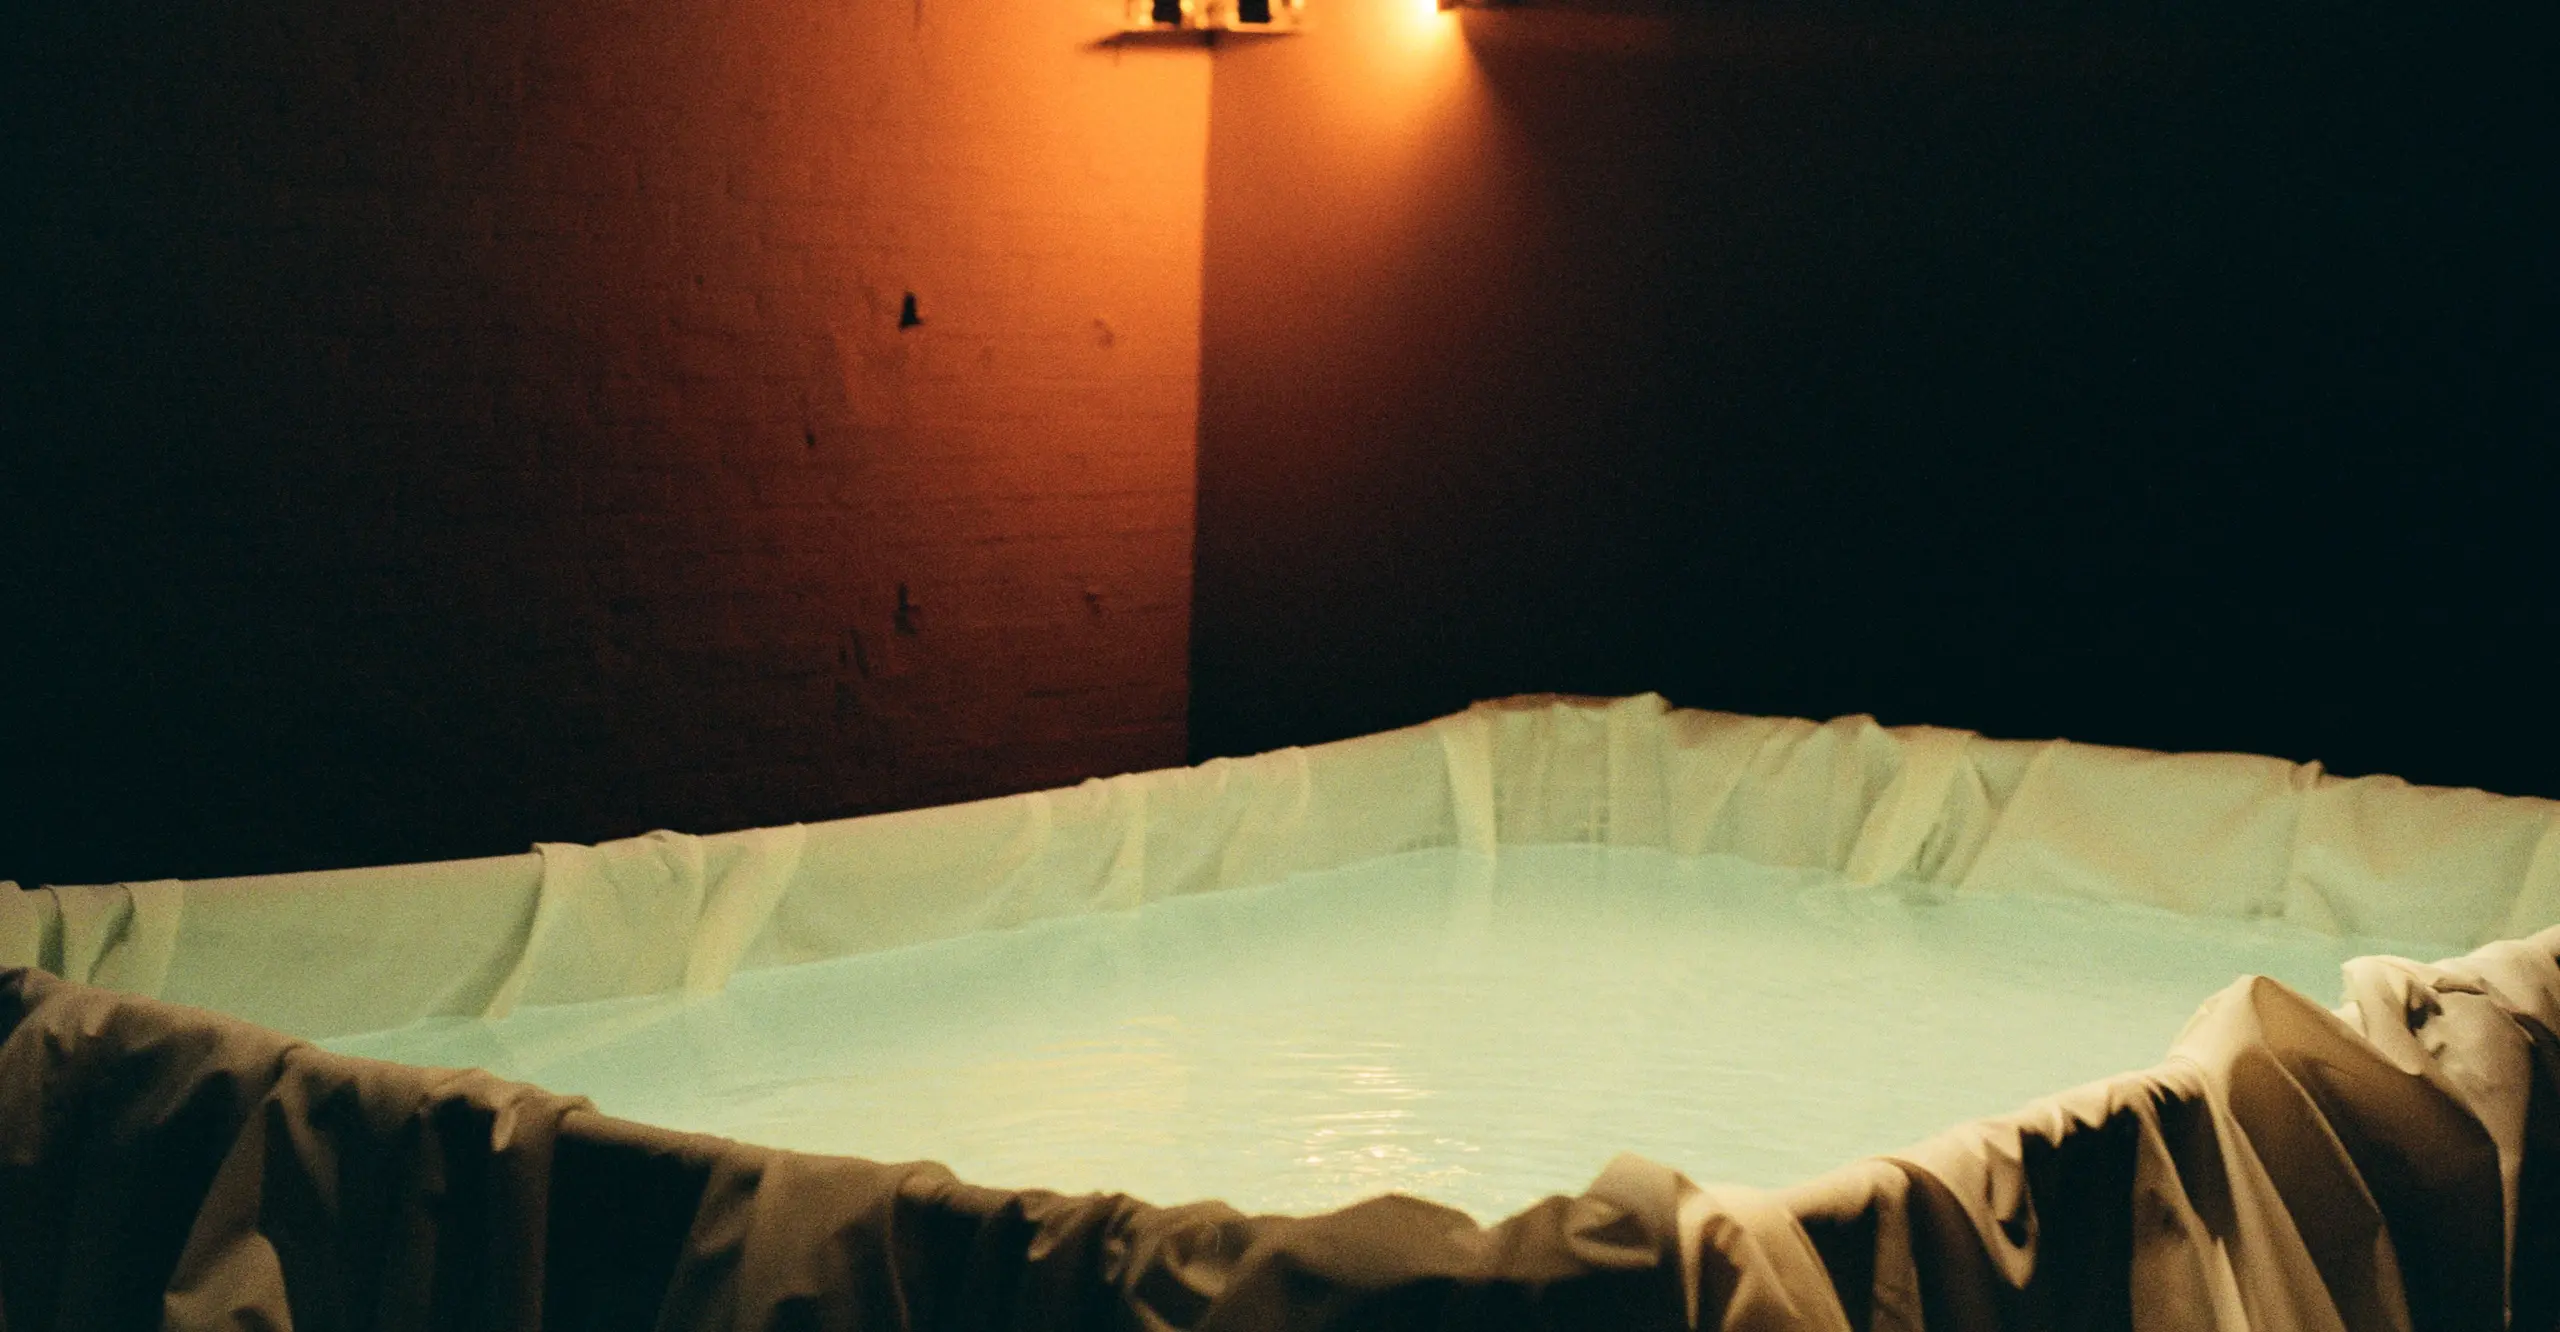 A pool is in the centre of the frame in a dimly lit room. 